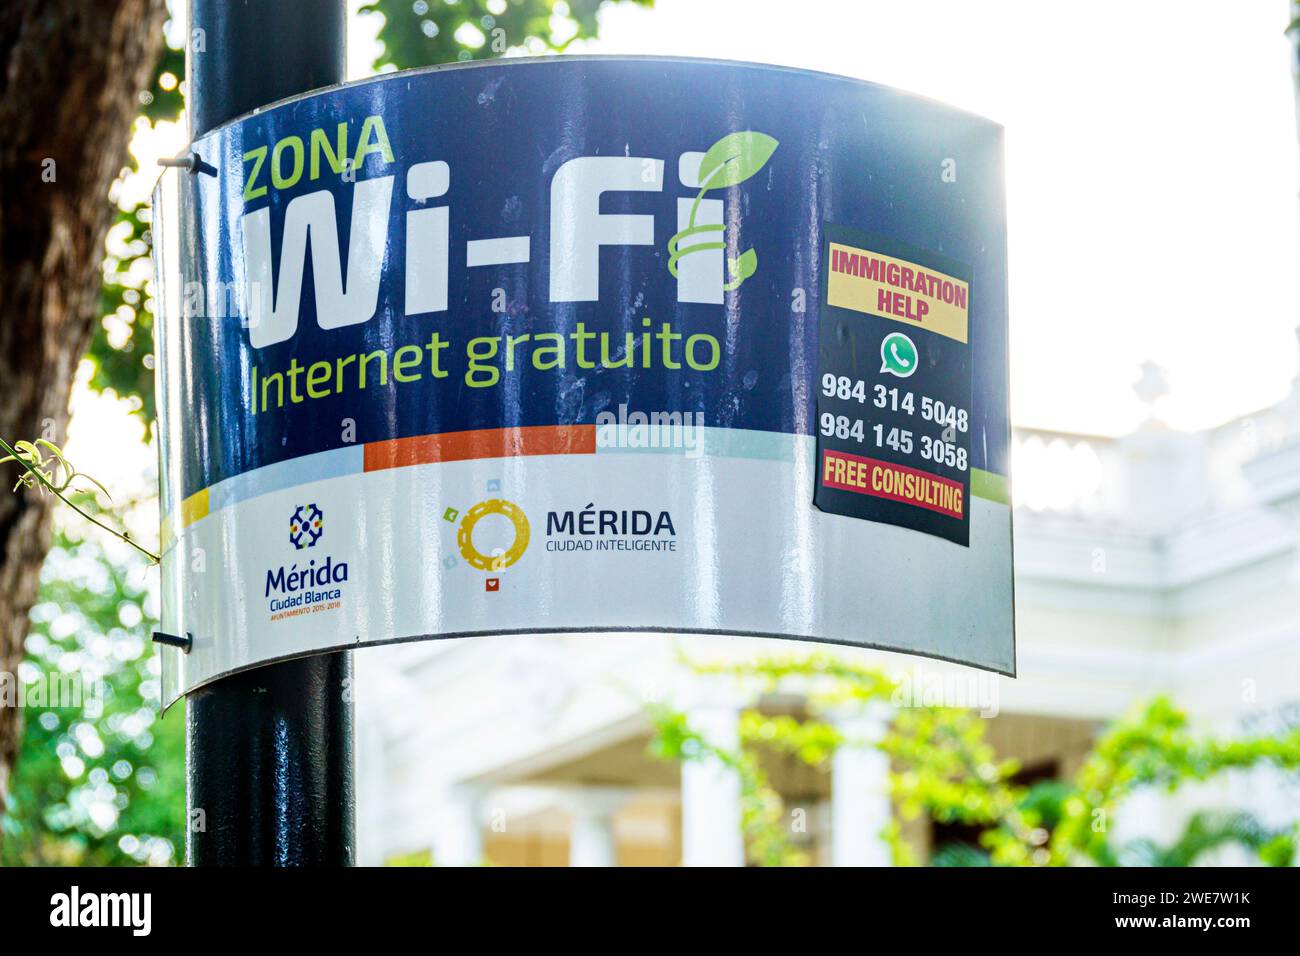 Merida Mexico,Zona Paseo Montejo Centro,sign free wi-fi Internet zone,ad immigration help free consulting,two 2 languages multiple,bilingual multiling Stock Photo